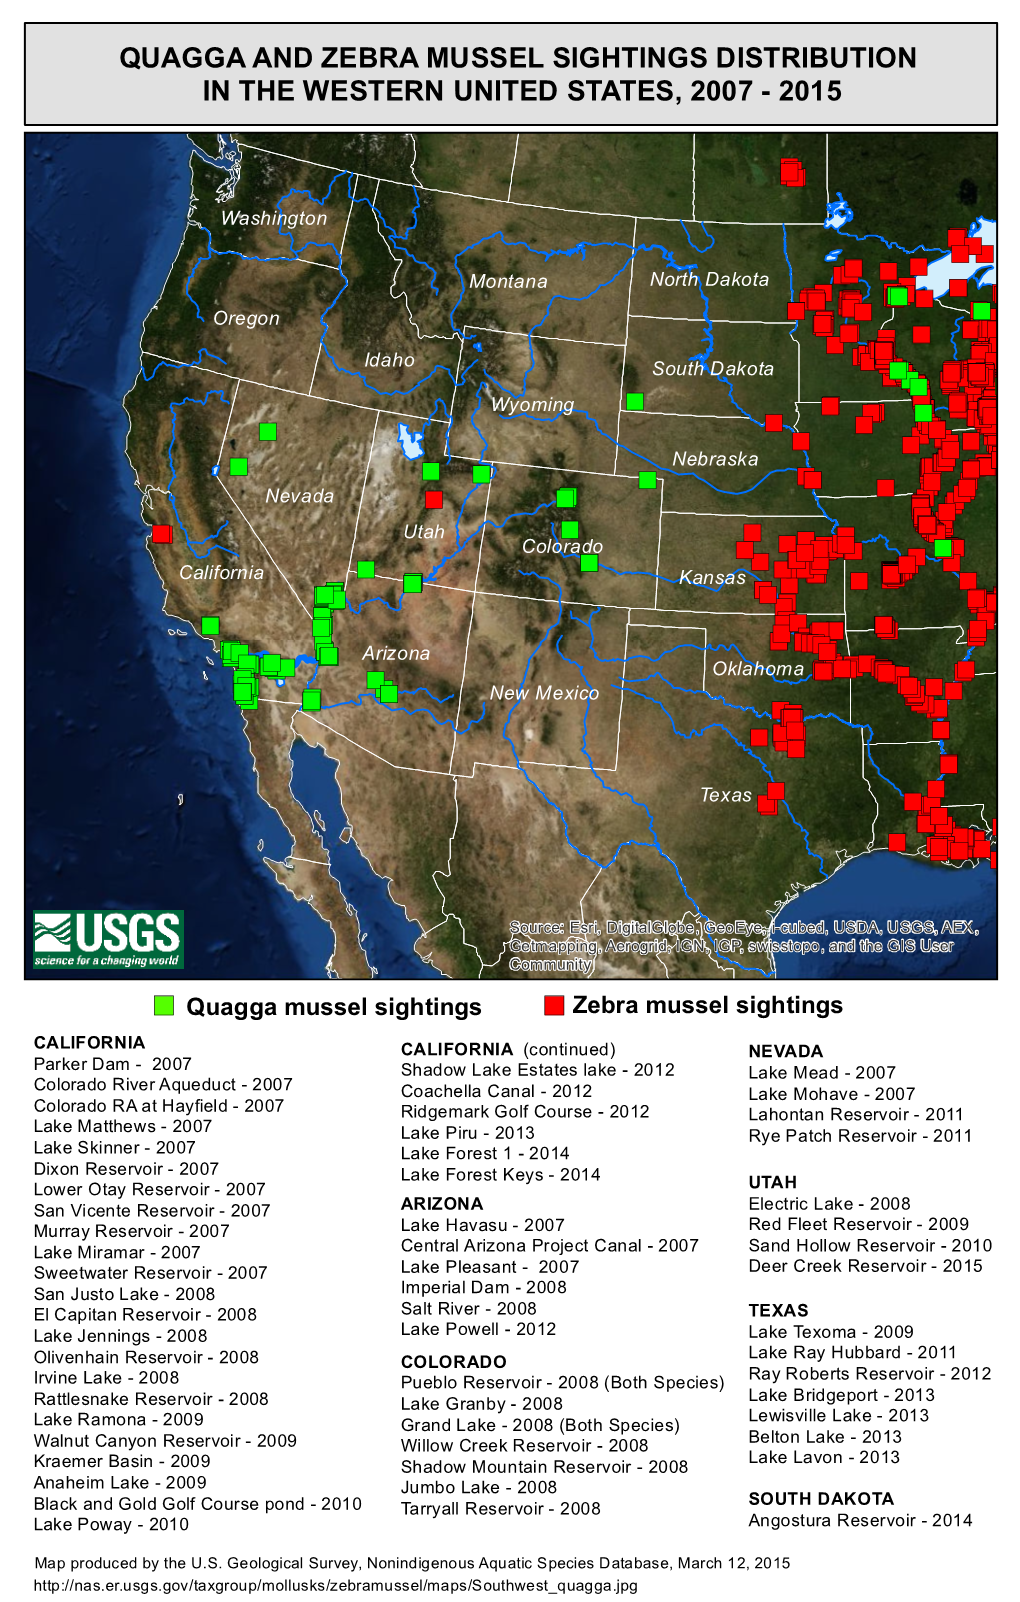 Quagga and Zebra Mussel Sightings Distribution in the Western United States, 2007 - 2015